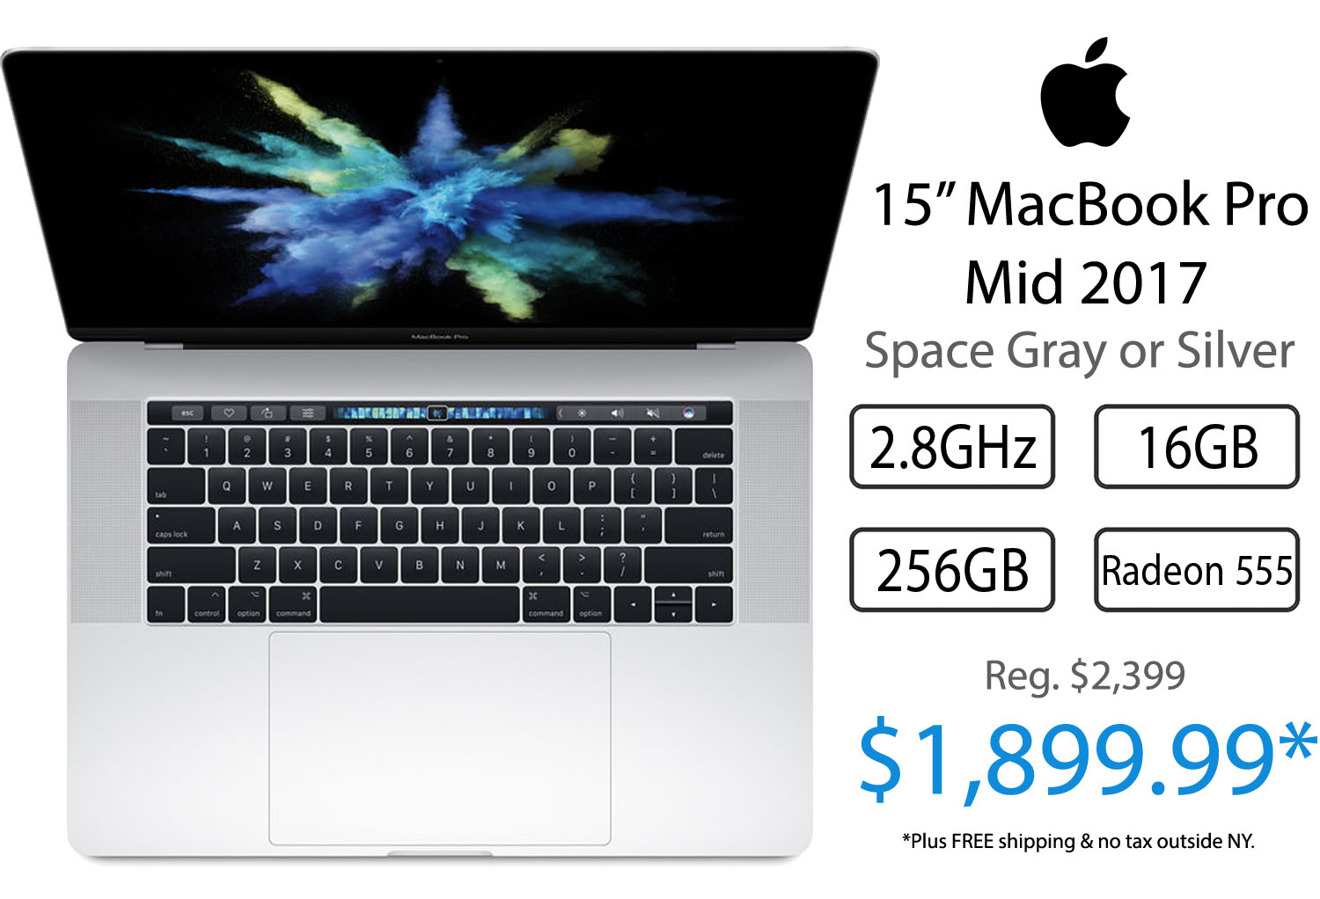 Best Price For Mac